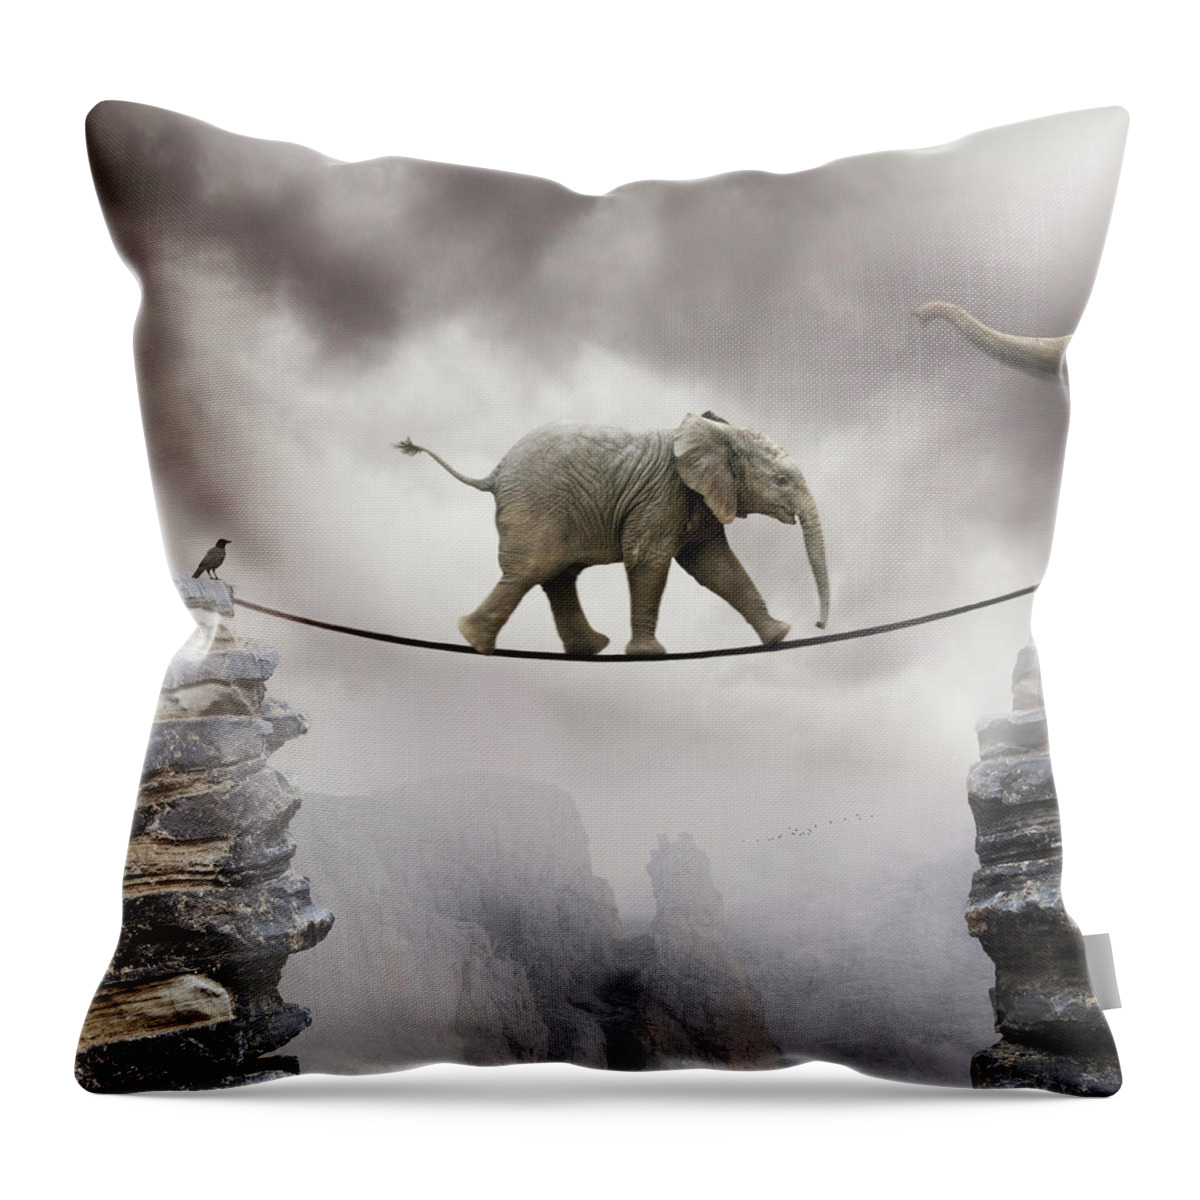 #faatoppicks Throw Pillow featuring the photograph Baby Elephant by By Sigi Kolbe